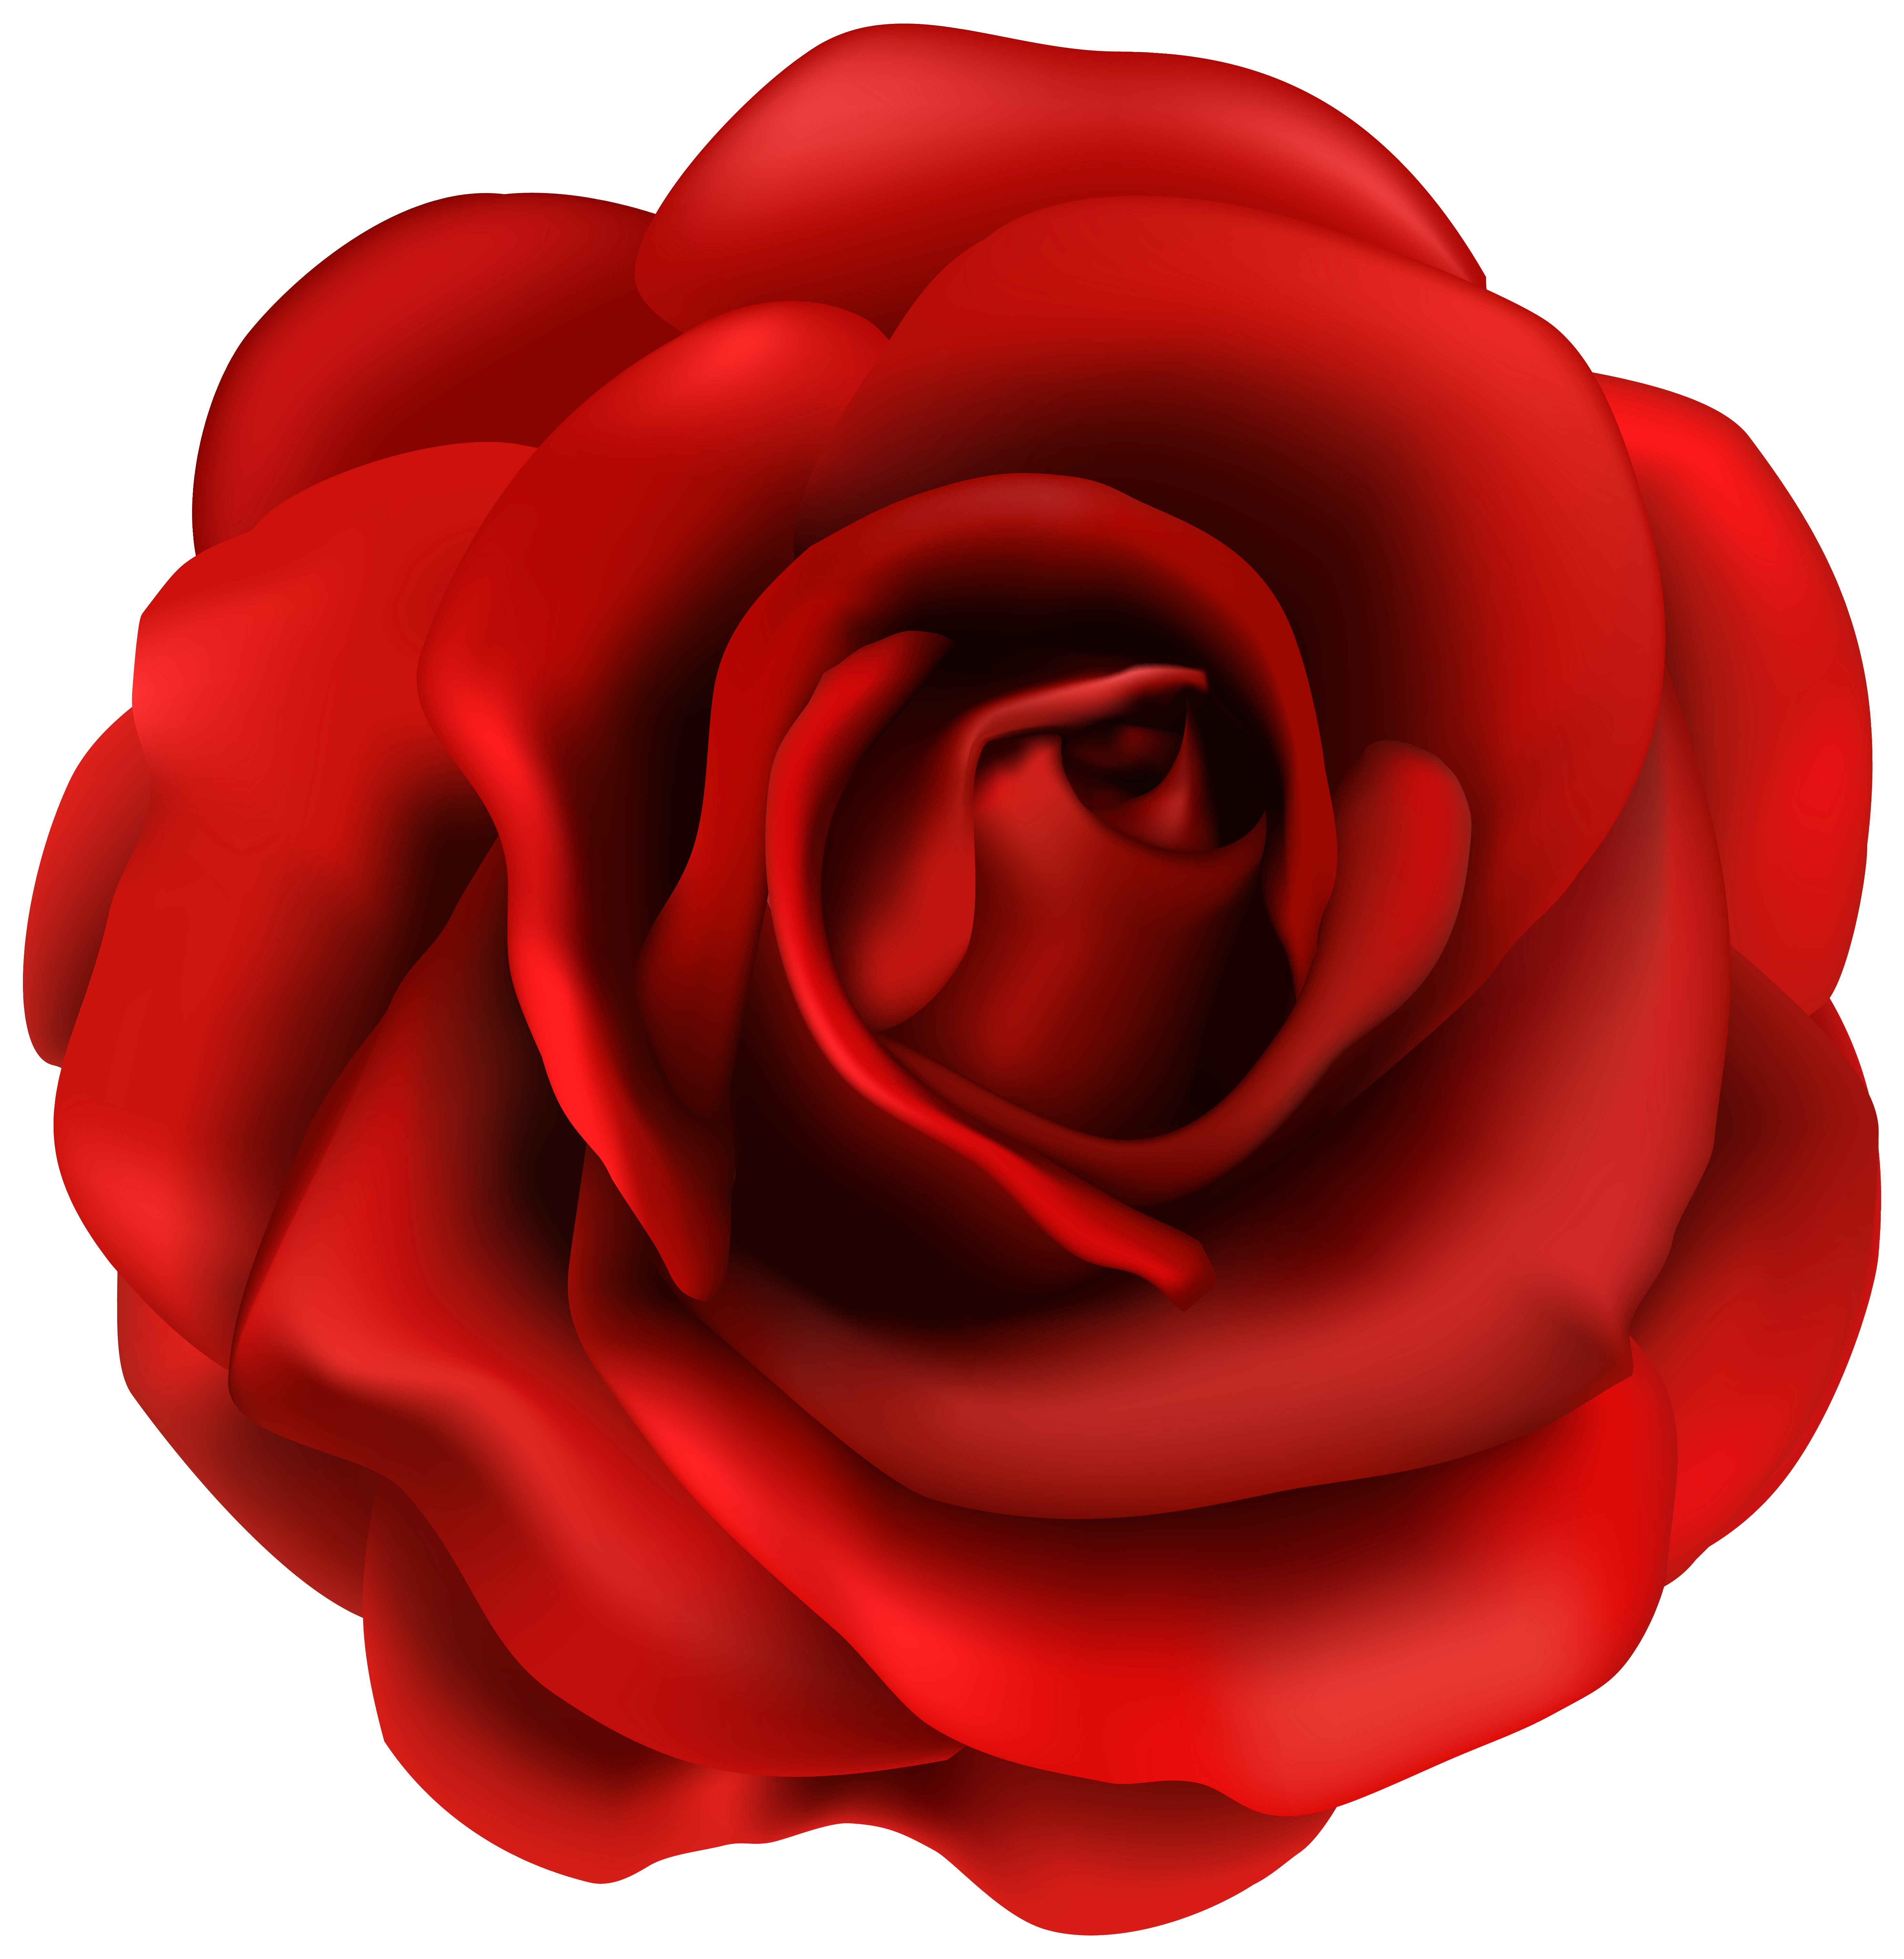 Red rose flower clipart image - Cliparting.com